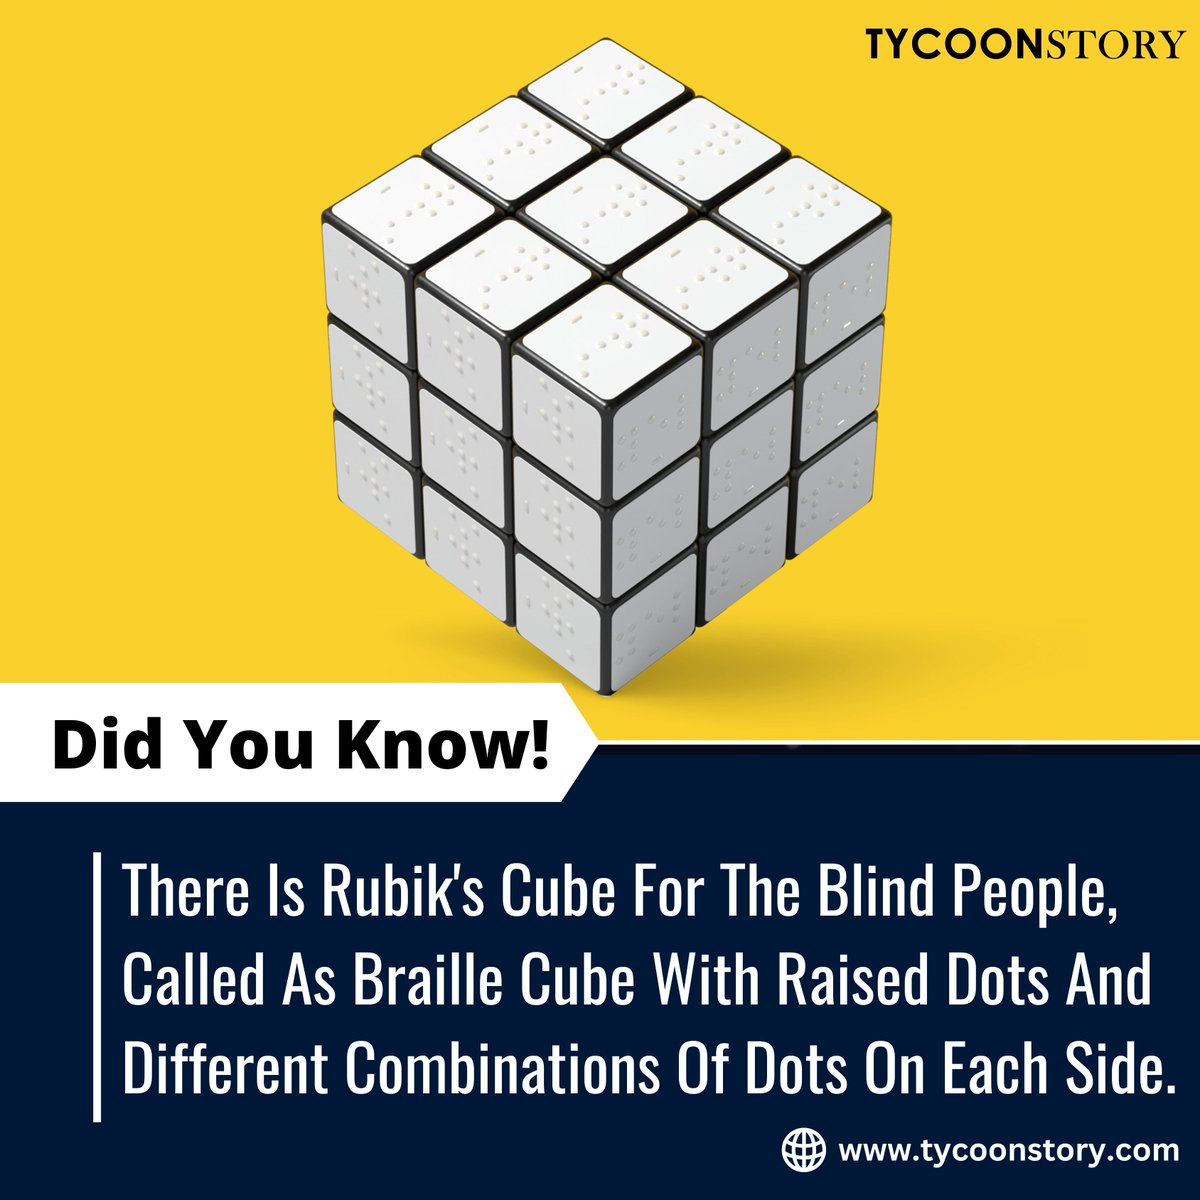 Introducing the Braille Cube: Rubik's for the visually impaired.

#BrailleCube #RubiksForBlind #InclusivePuzzles #AccessibleGaming #TactilePuzzles #VisuallyImpaired #BrailleInnovation #ProblemSolving #gaming @TycoonStoryCo @hackaday @tycoonstory2020 @cubelelo